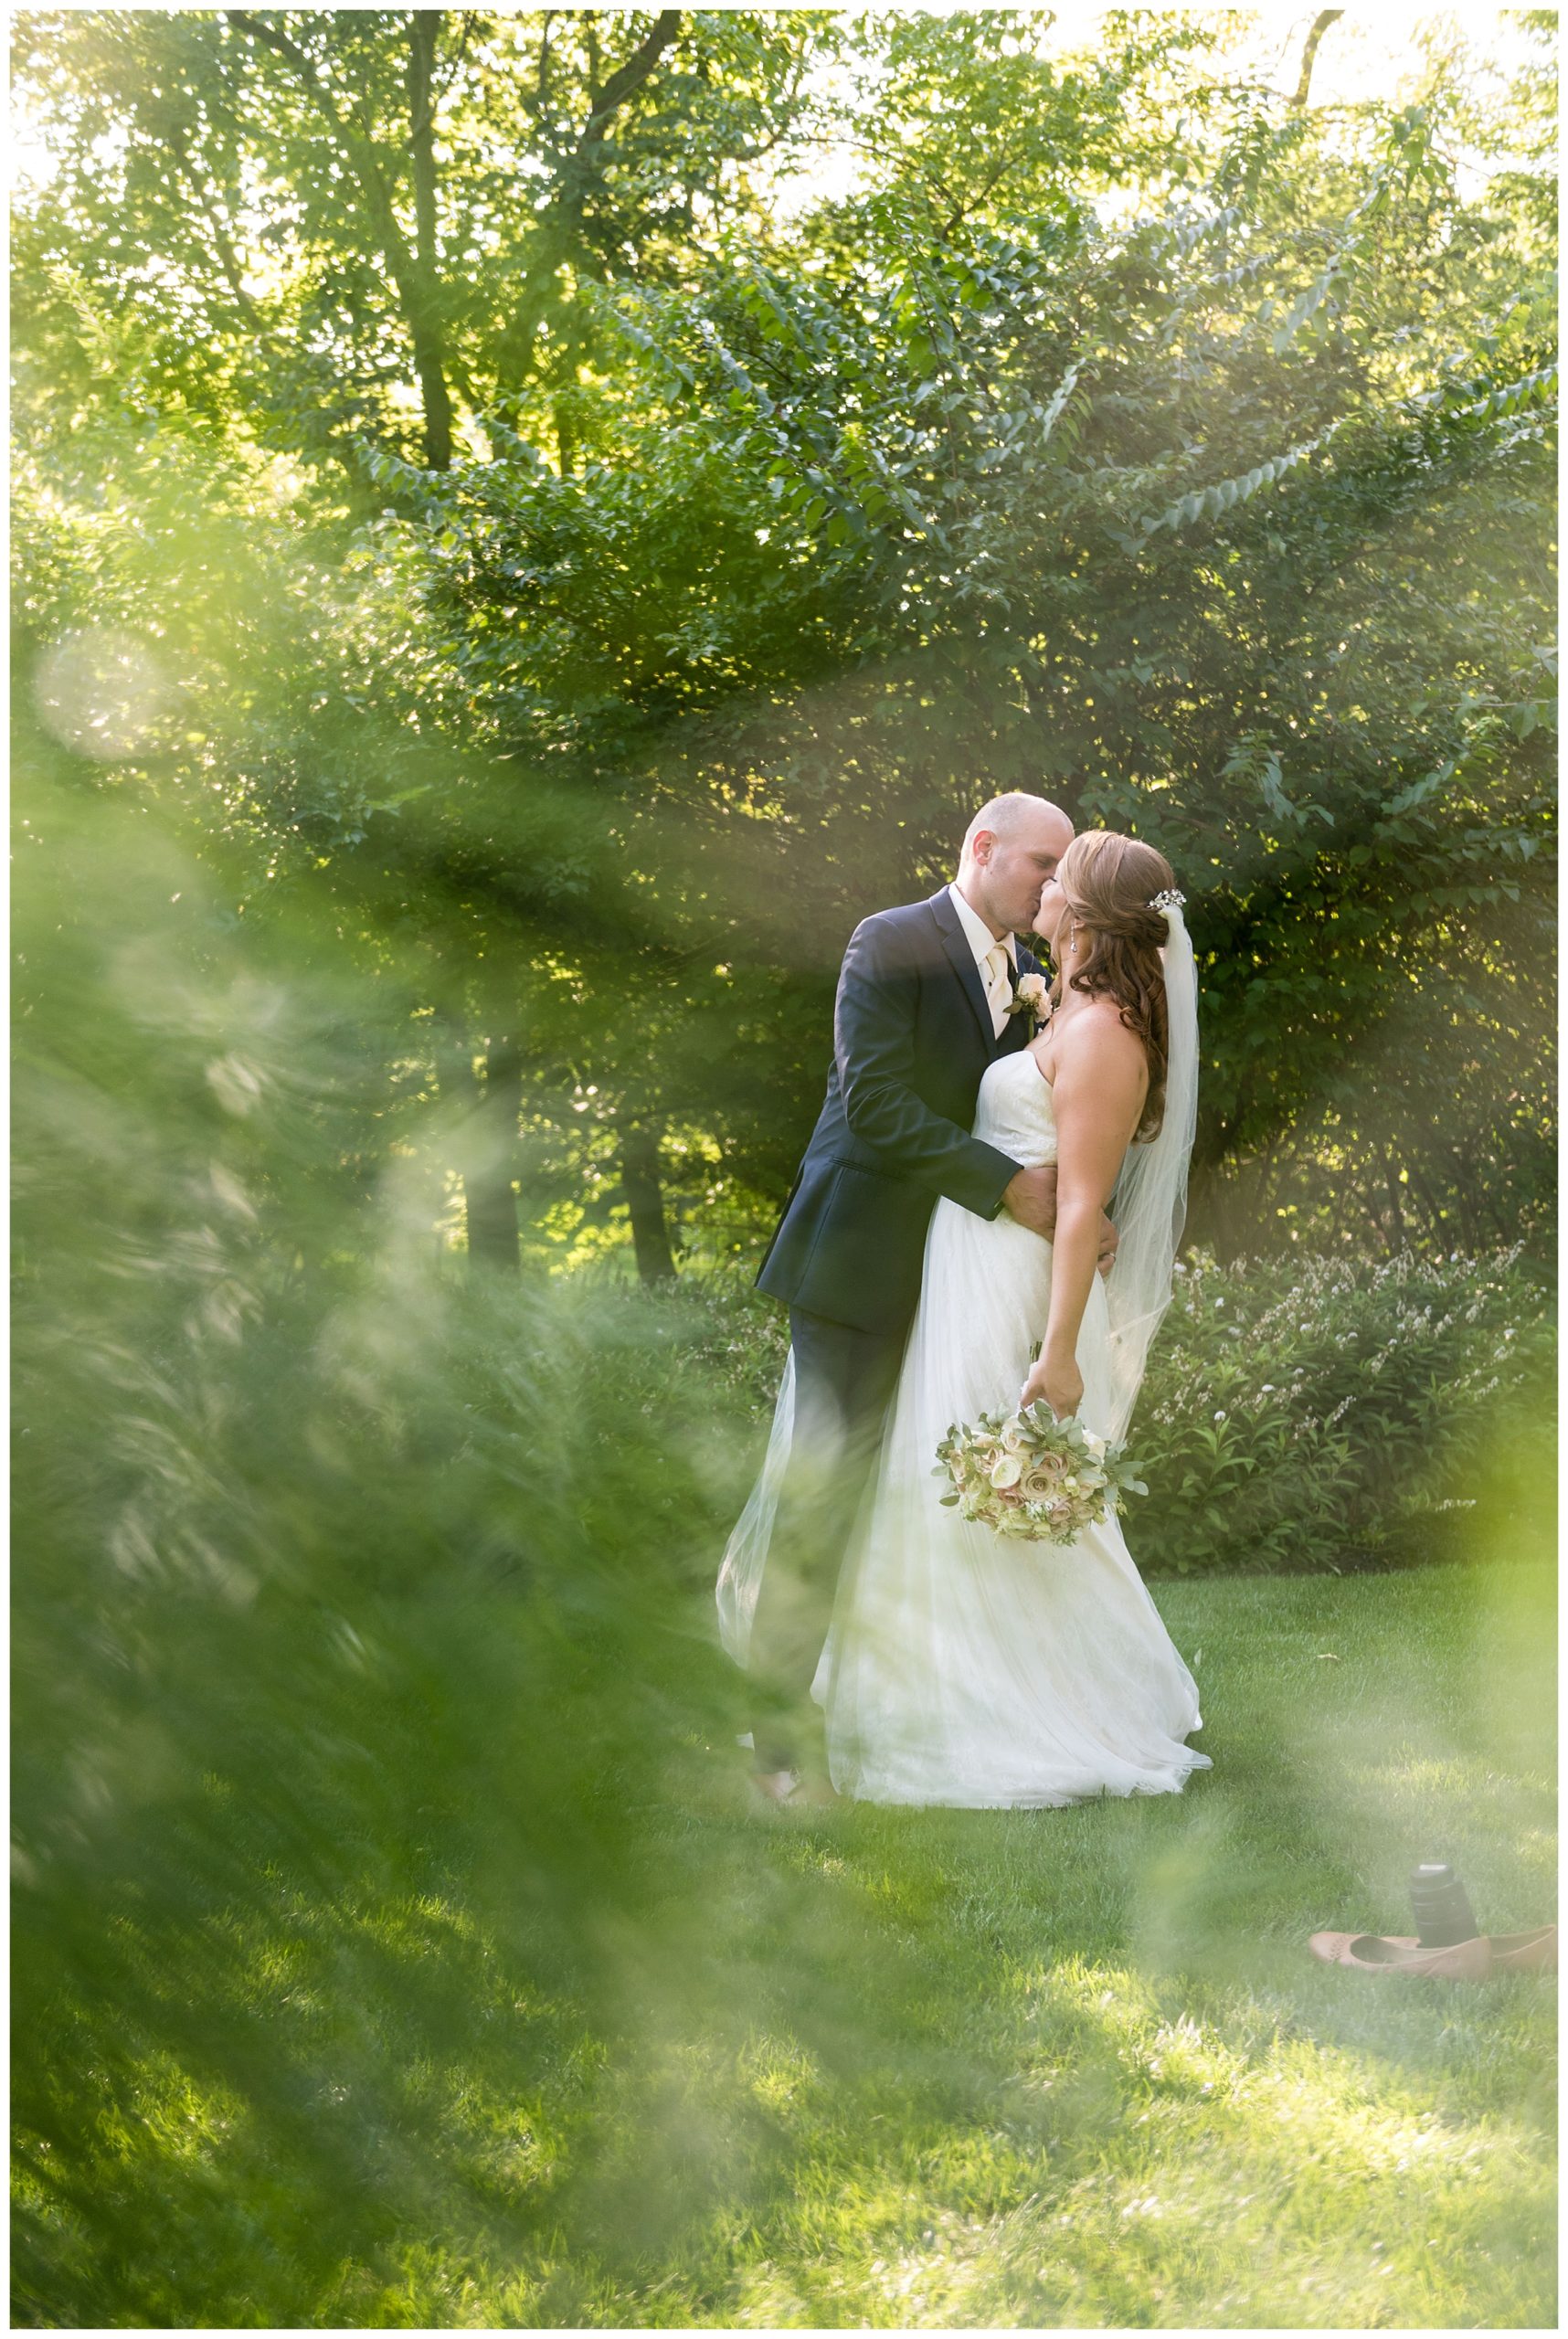 Bride and groom kissing in gardens shot through leaves